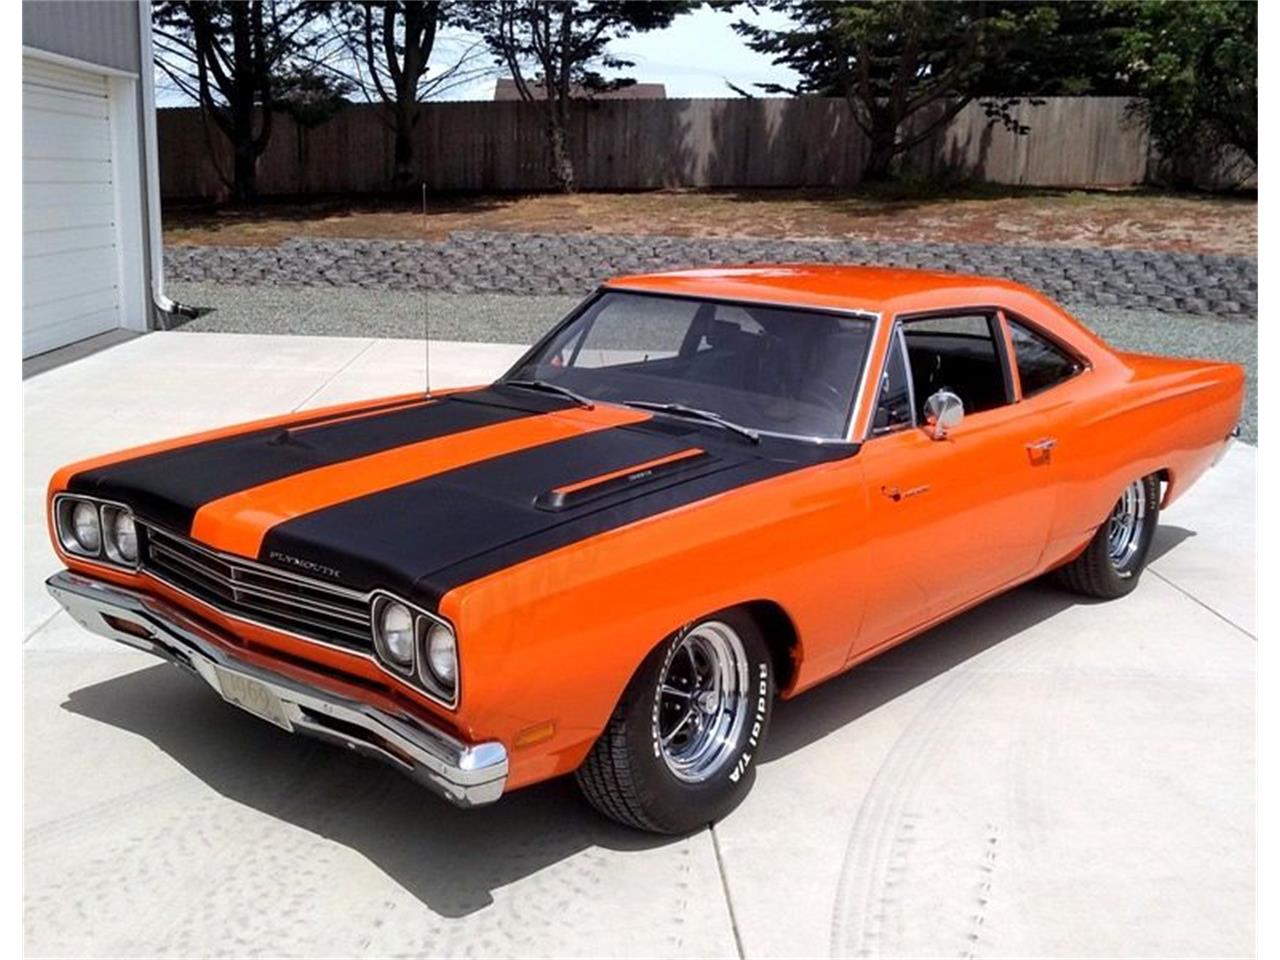 For Sale: 1969 Plymouth Road Runner in Arlington, Texas for sale in Arlington, TX